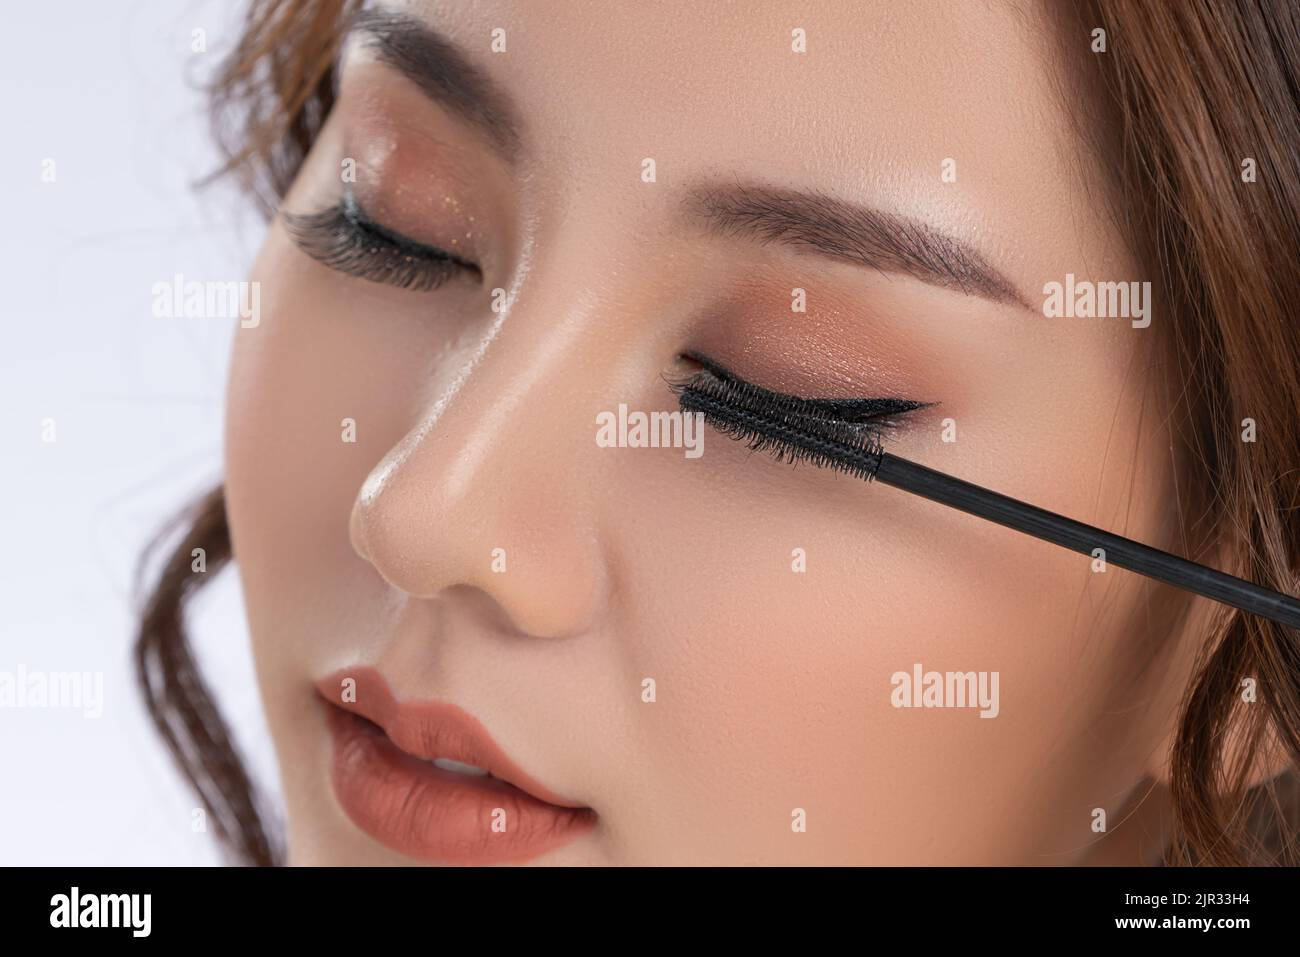 Closeup gorgeous young woman putting black mascara on her long eyelashes with brush. Beauty cosmetic concept. Female model with perfect skin. Stock Photo